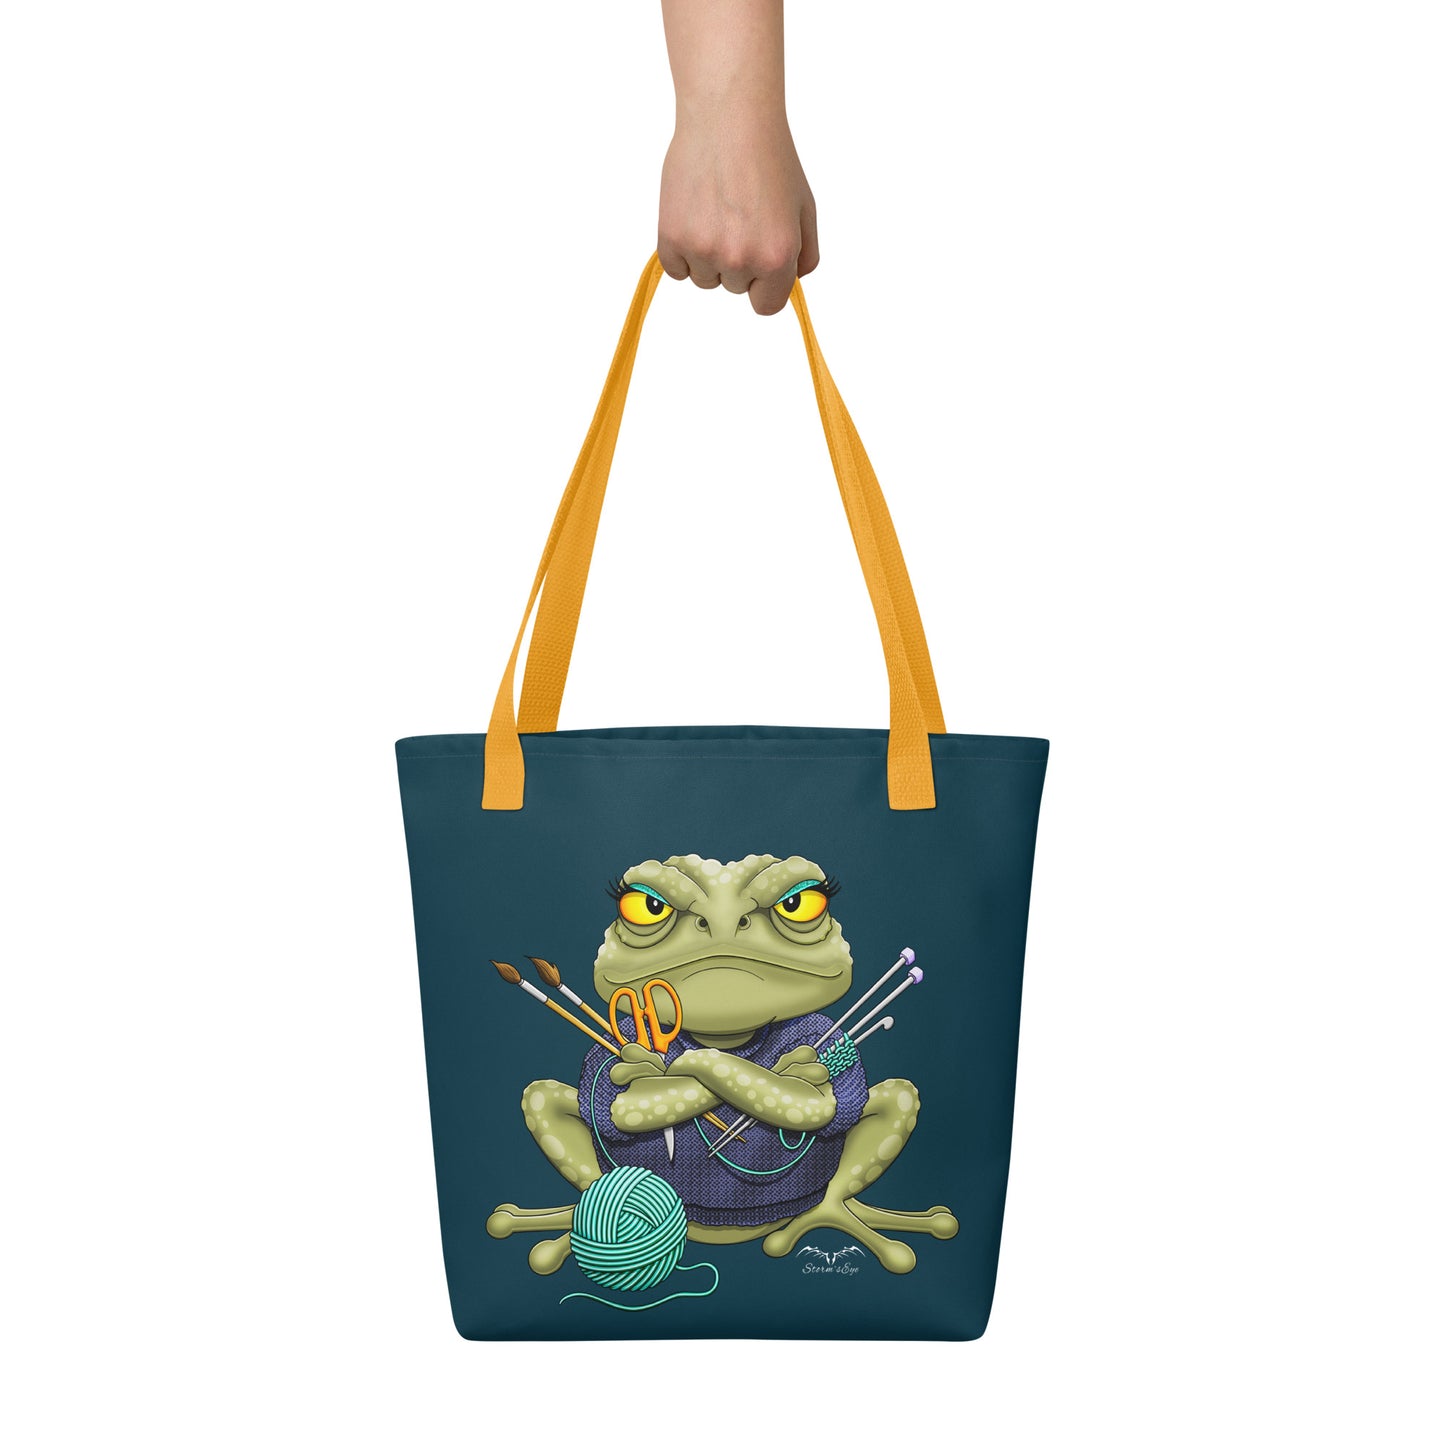 Stormseye design crafting frog large tote bag carried view